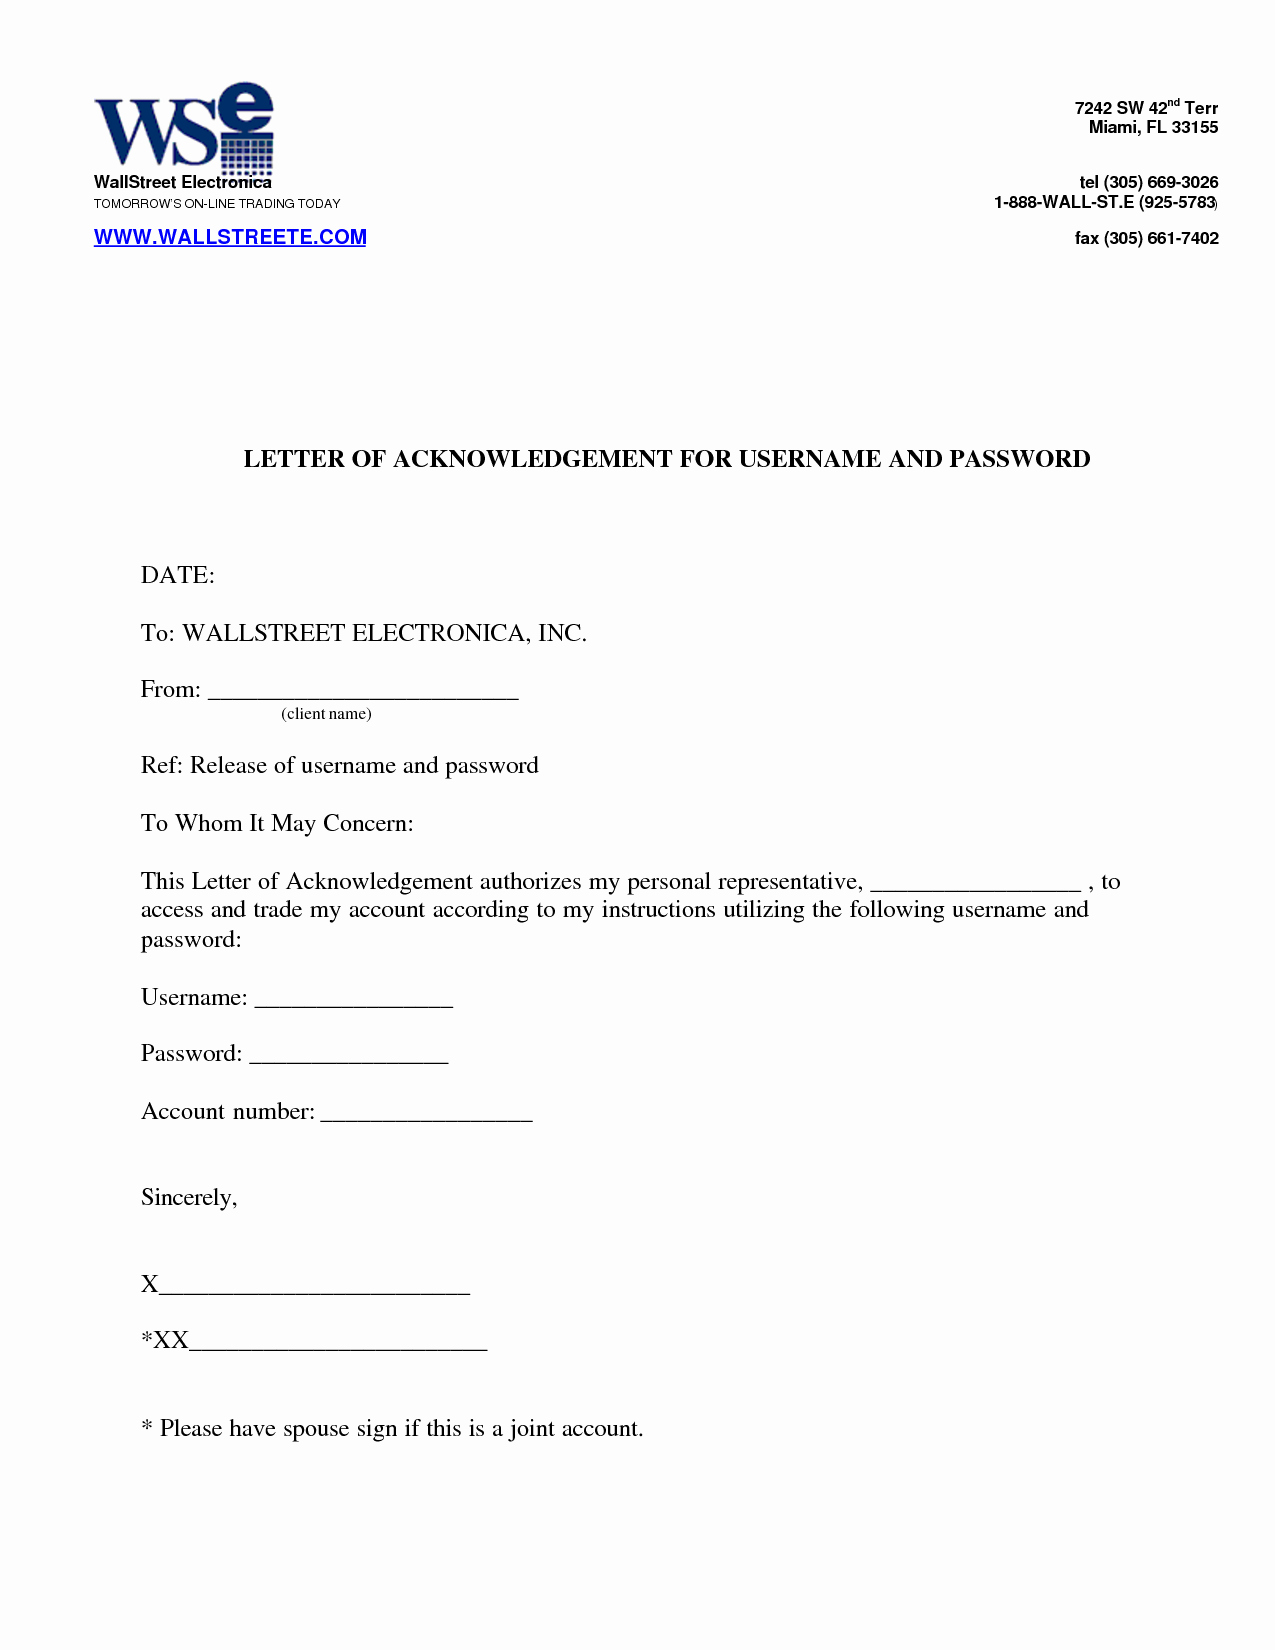 Employee Acknowledgement form Template Best Of Payment Acknowledgement Letter Sample